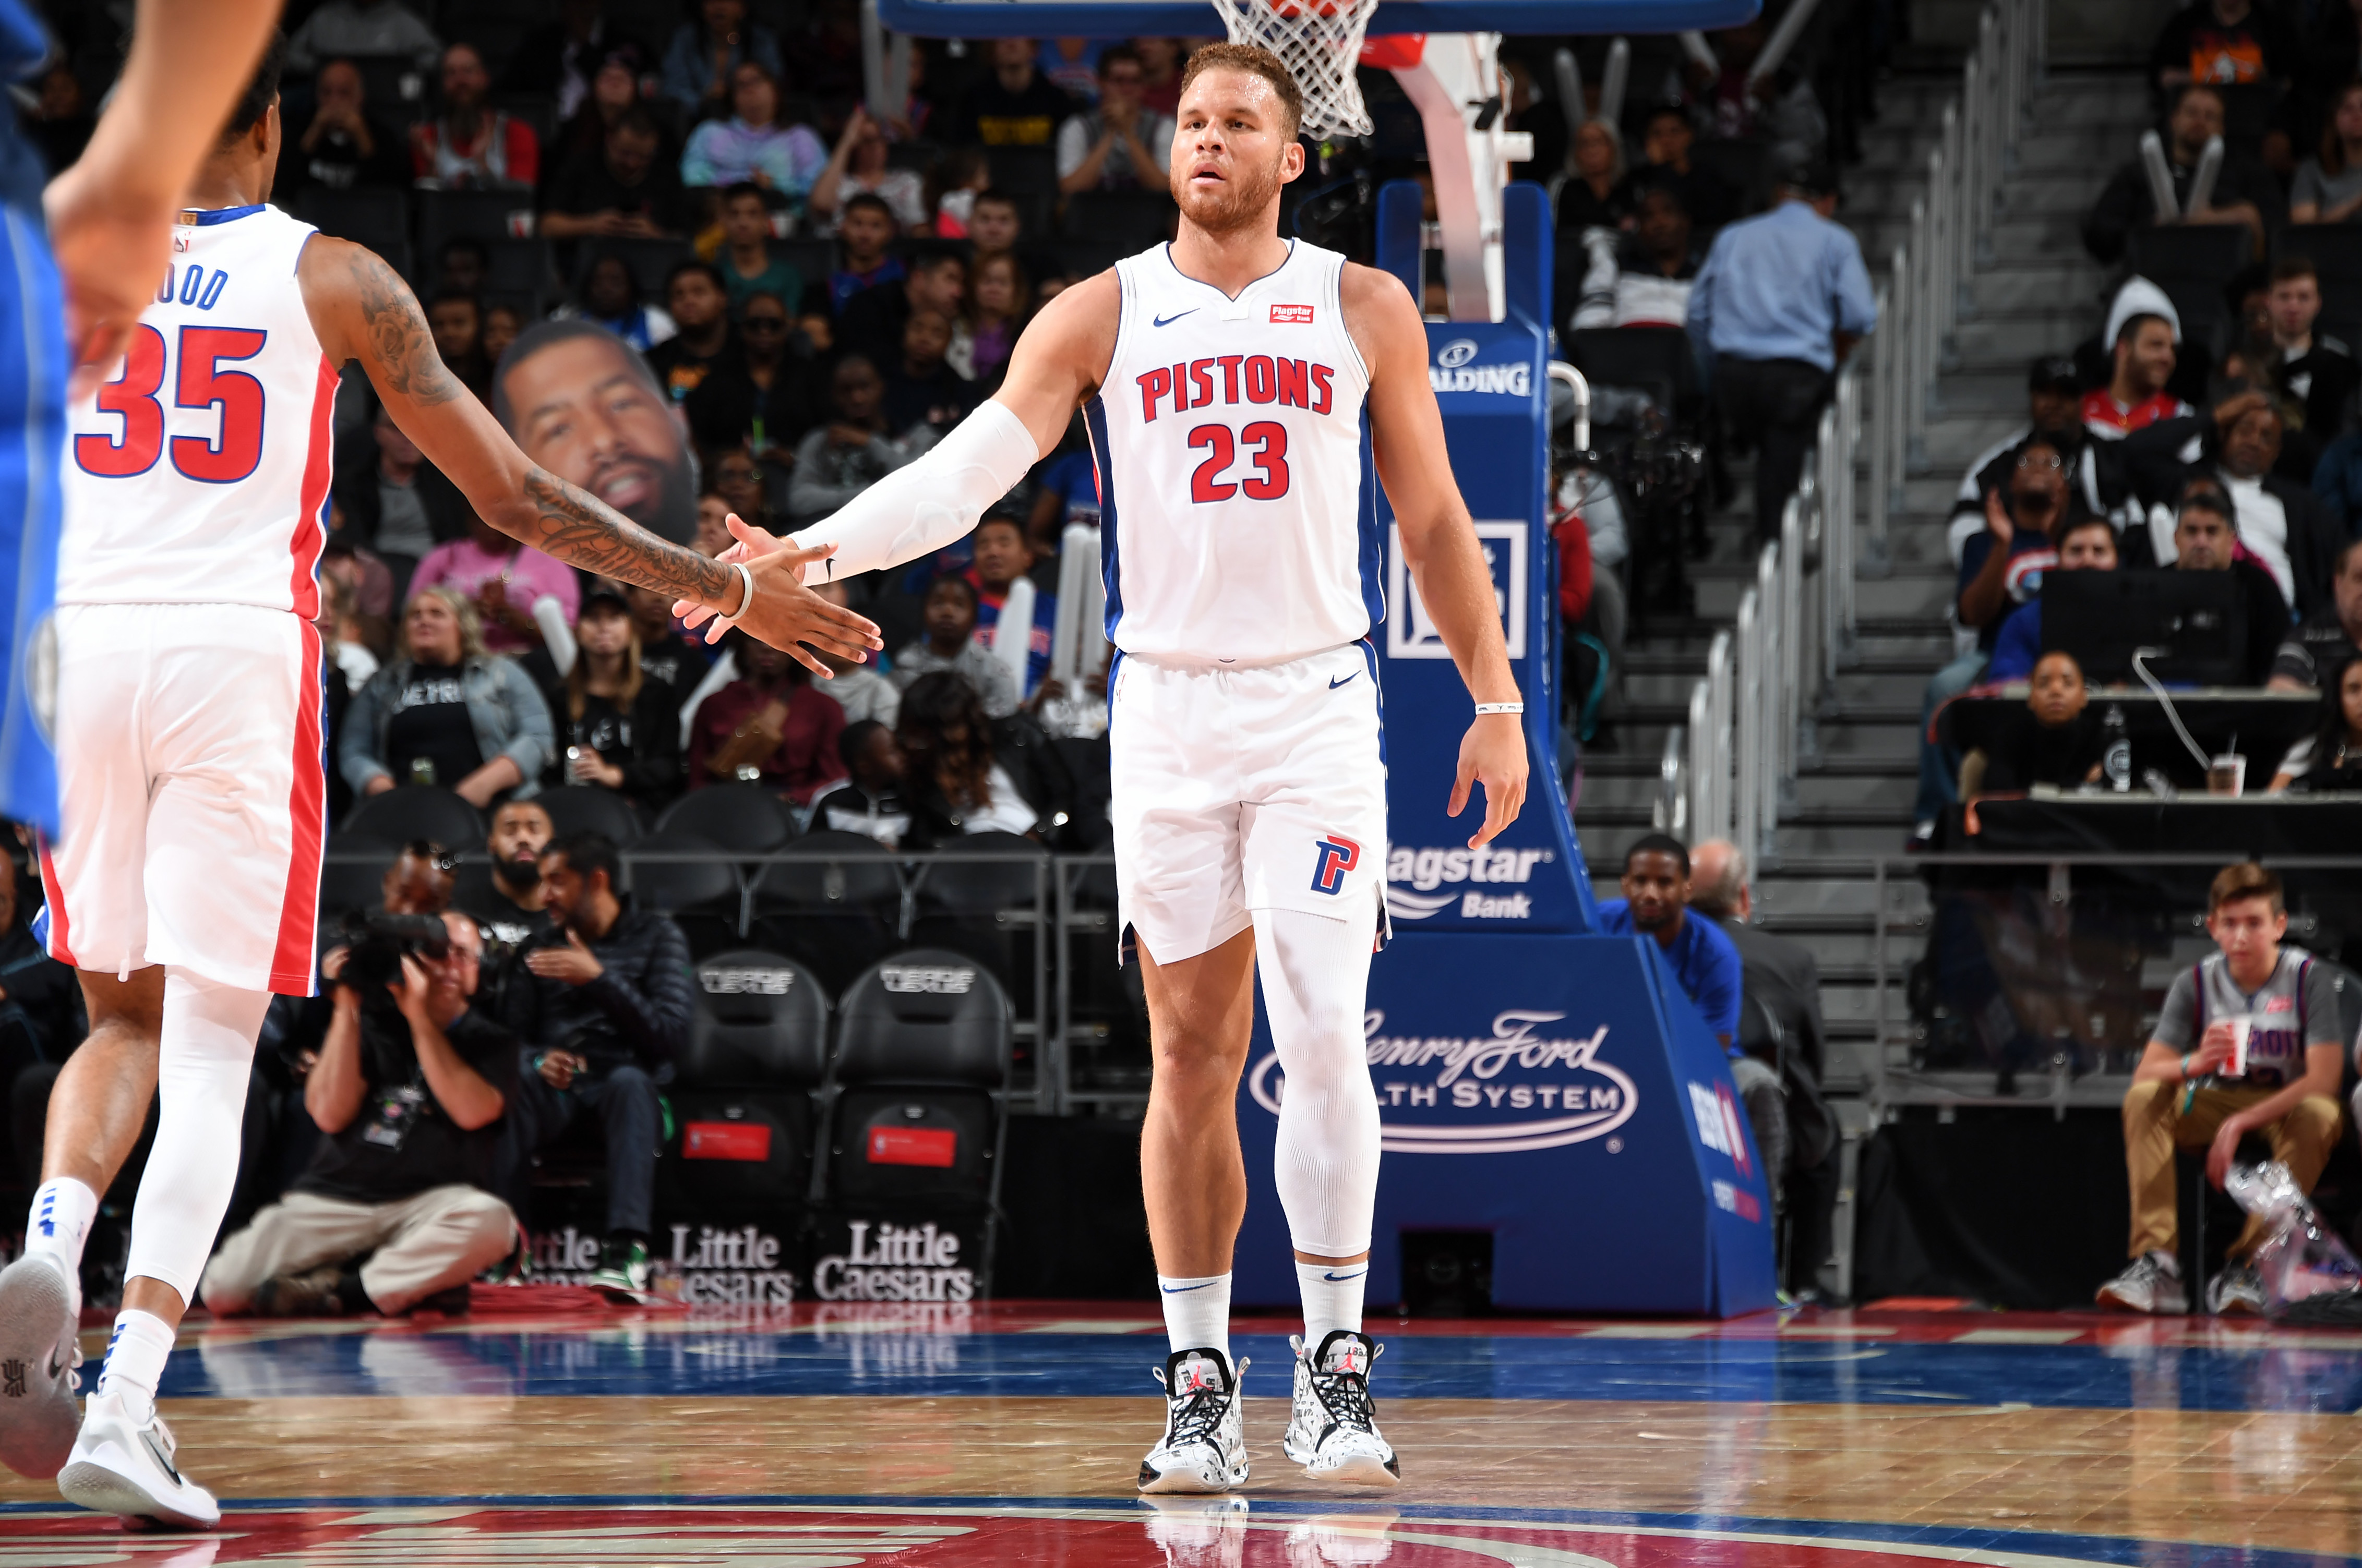 Blake Griffin's top 10 commercial list